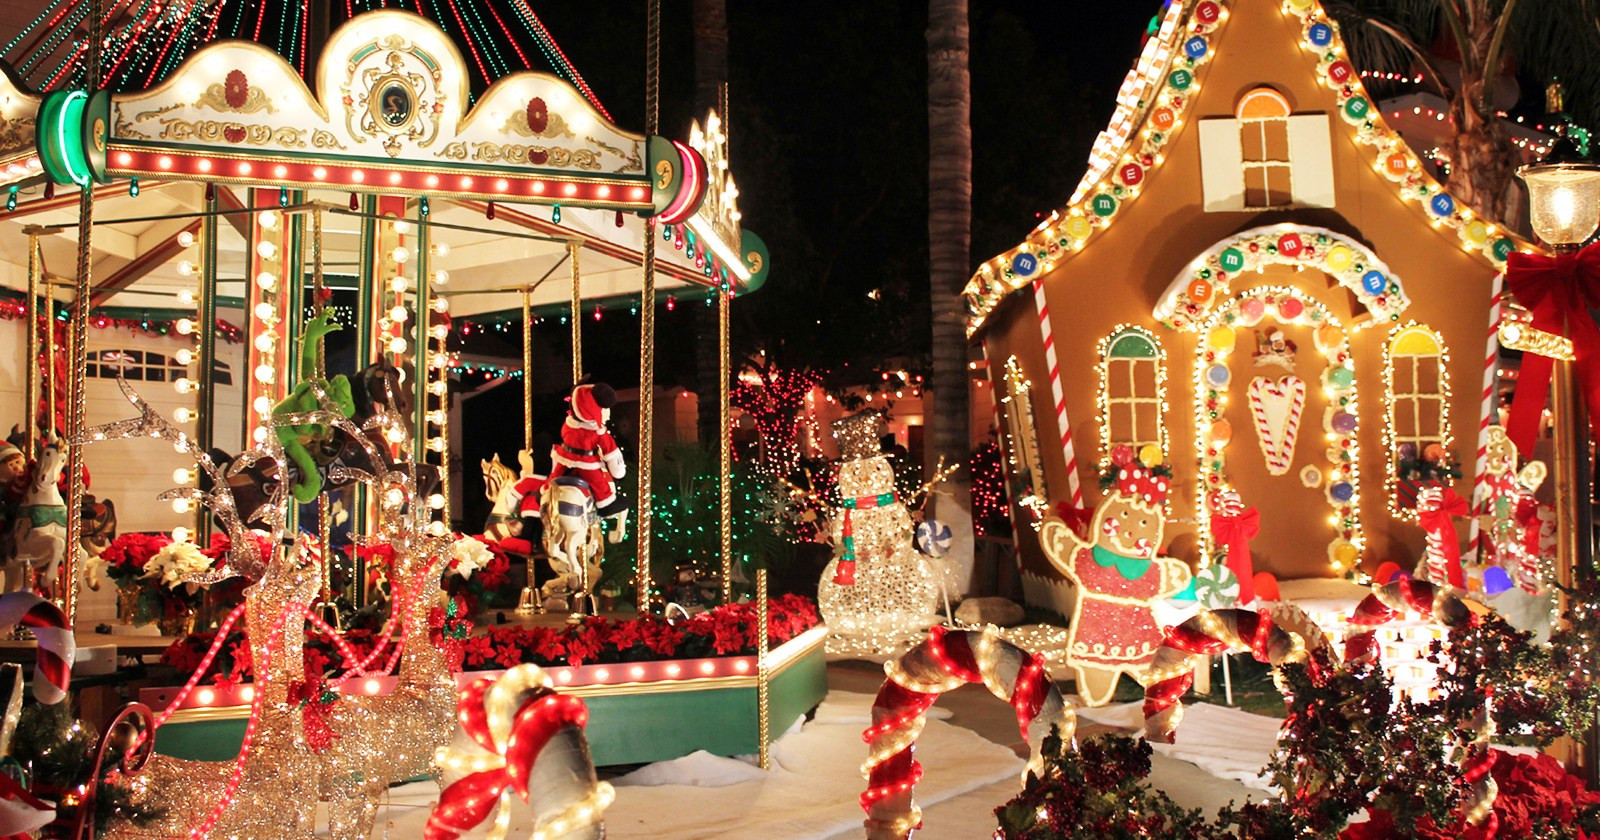 Outdoor Lighted Christmas Decorations Wholesale
 Tips to Install Outdoor Christmas Lights